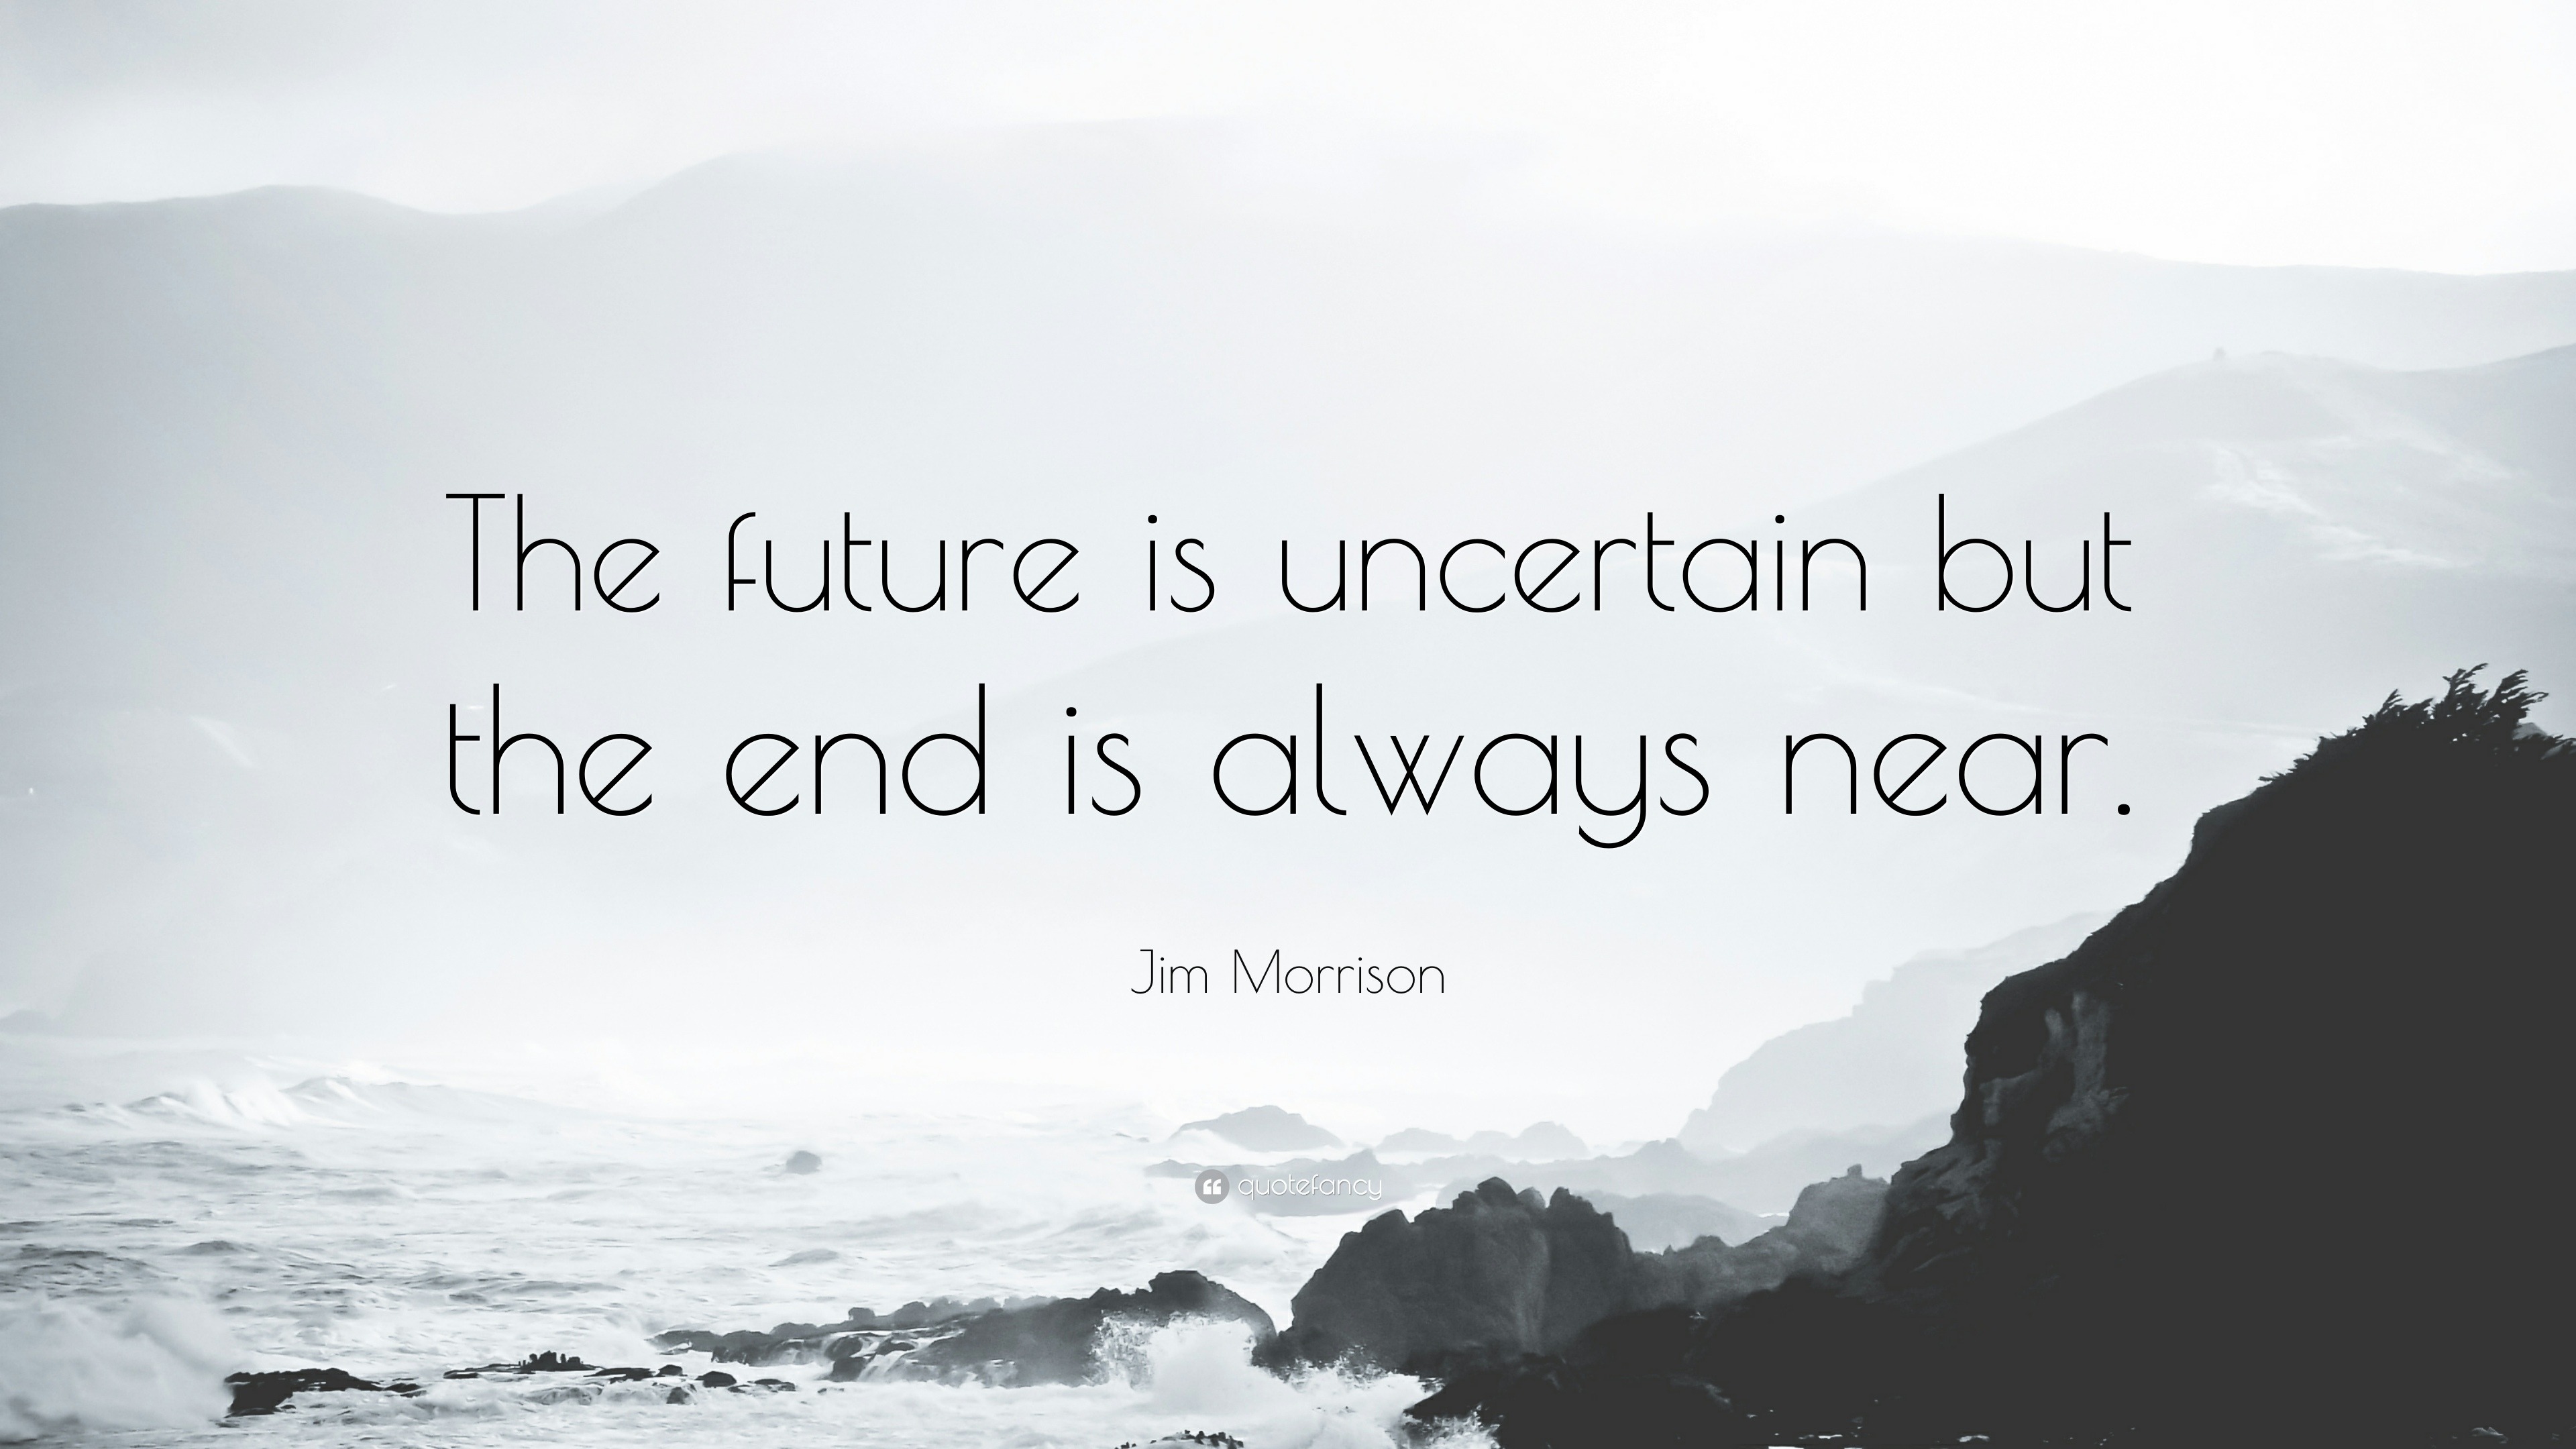 Jim Morrison Quote: “The future is uncertain but the end is always near.”